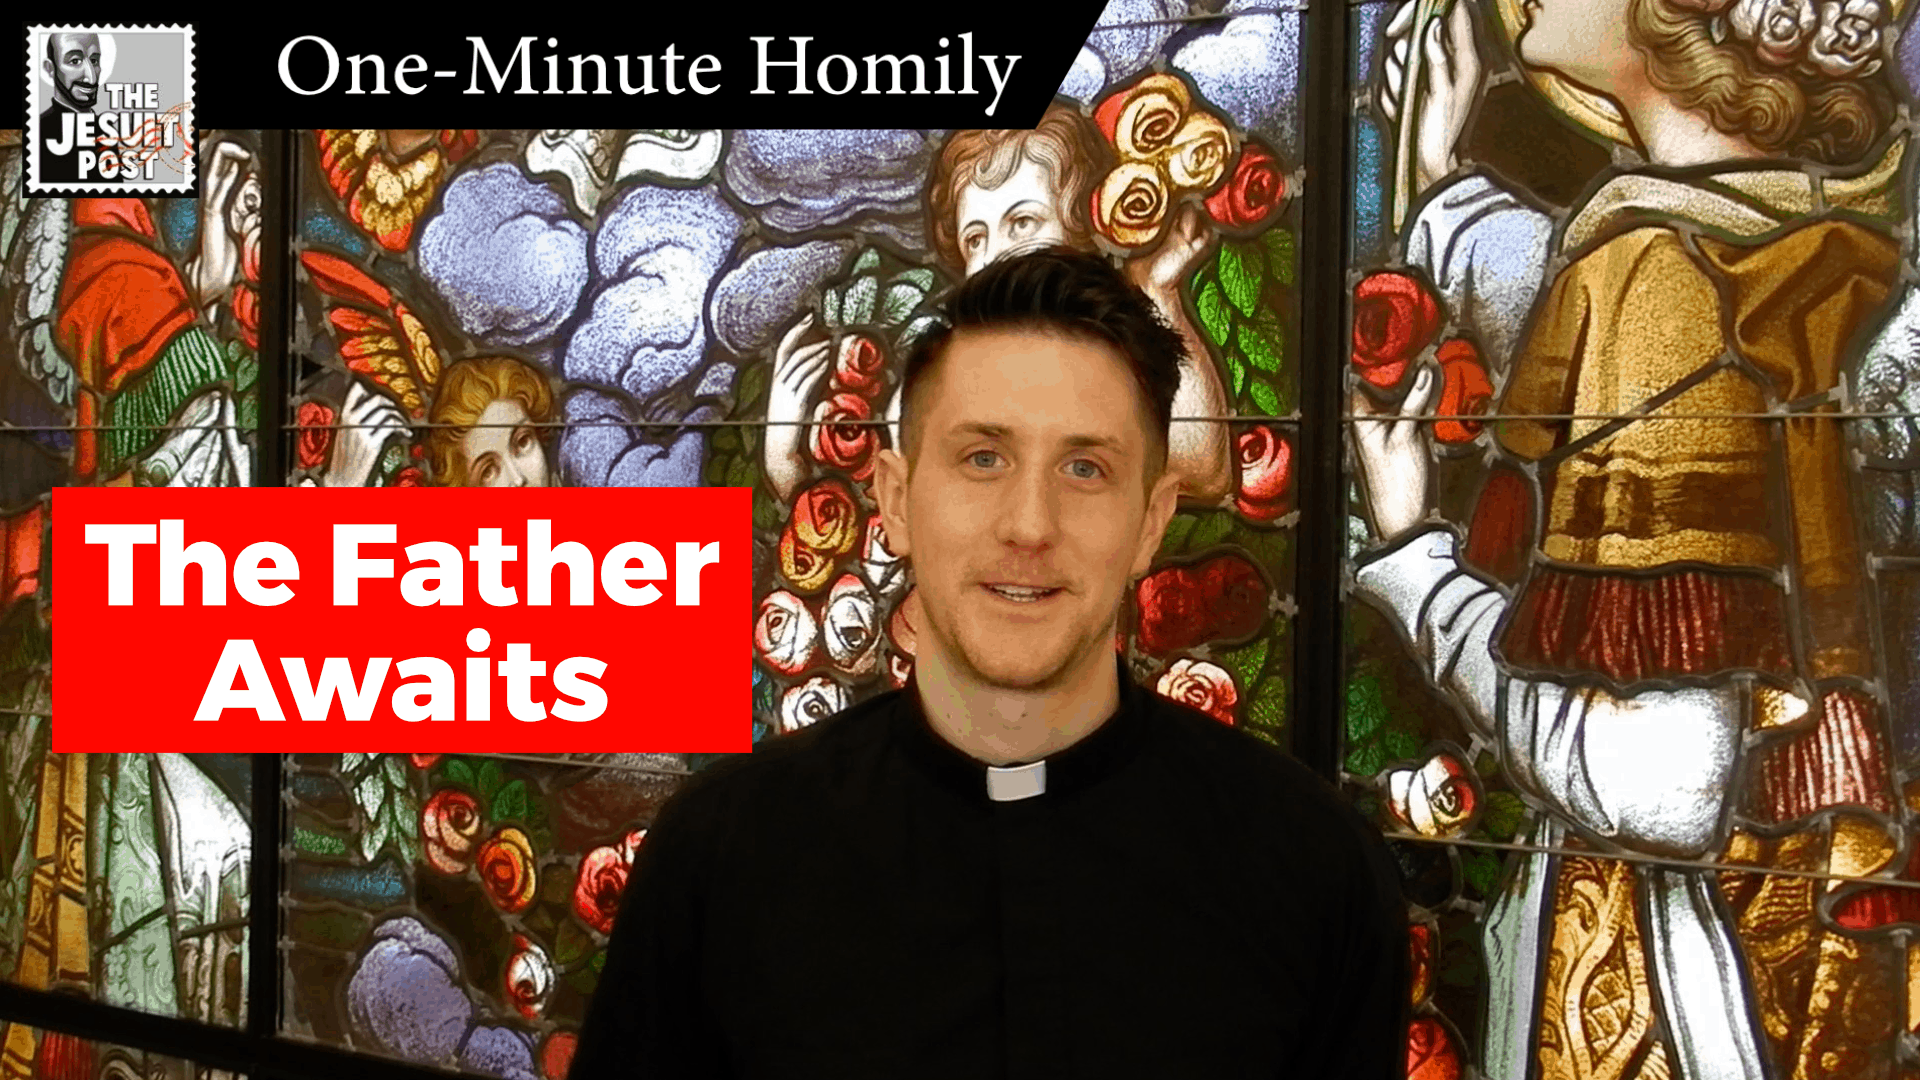 One-Minute Homily: “The Father Awaits”